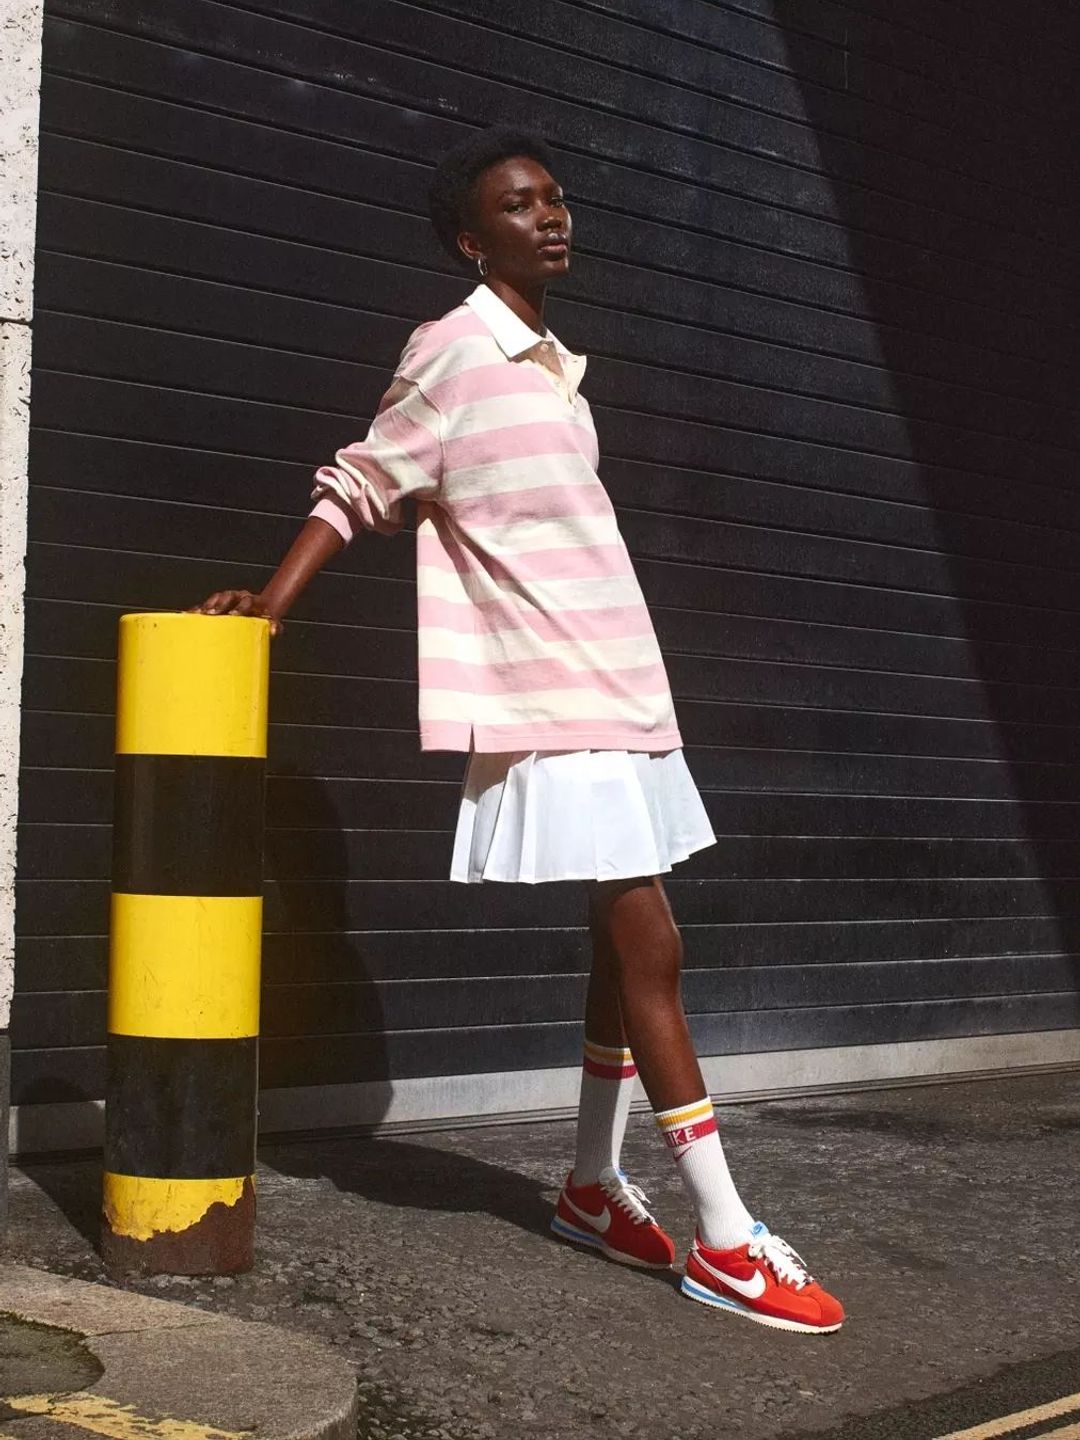 A model wears Nike Cortez shoes in red, white and blue